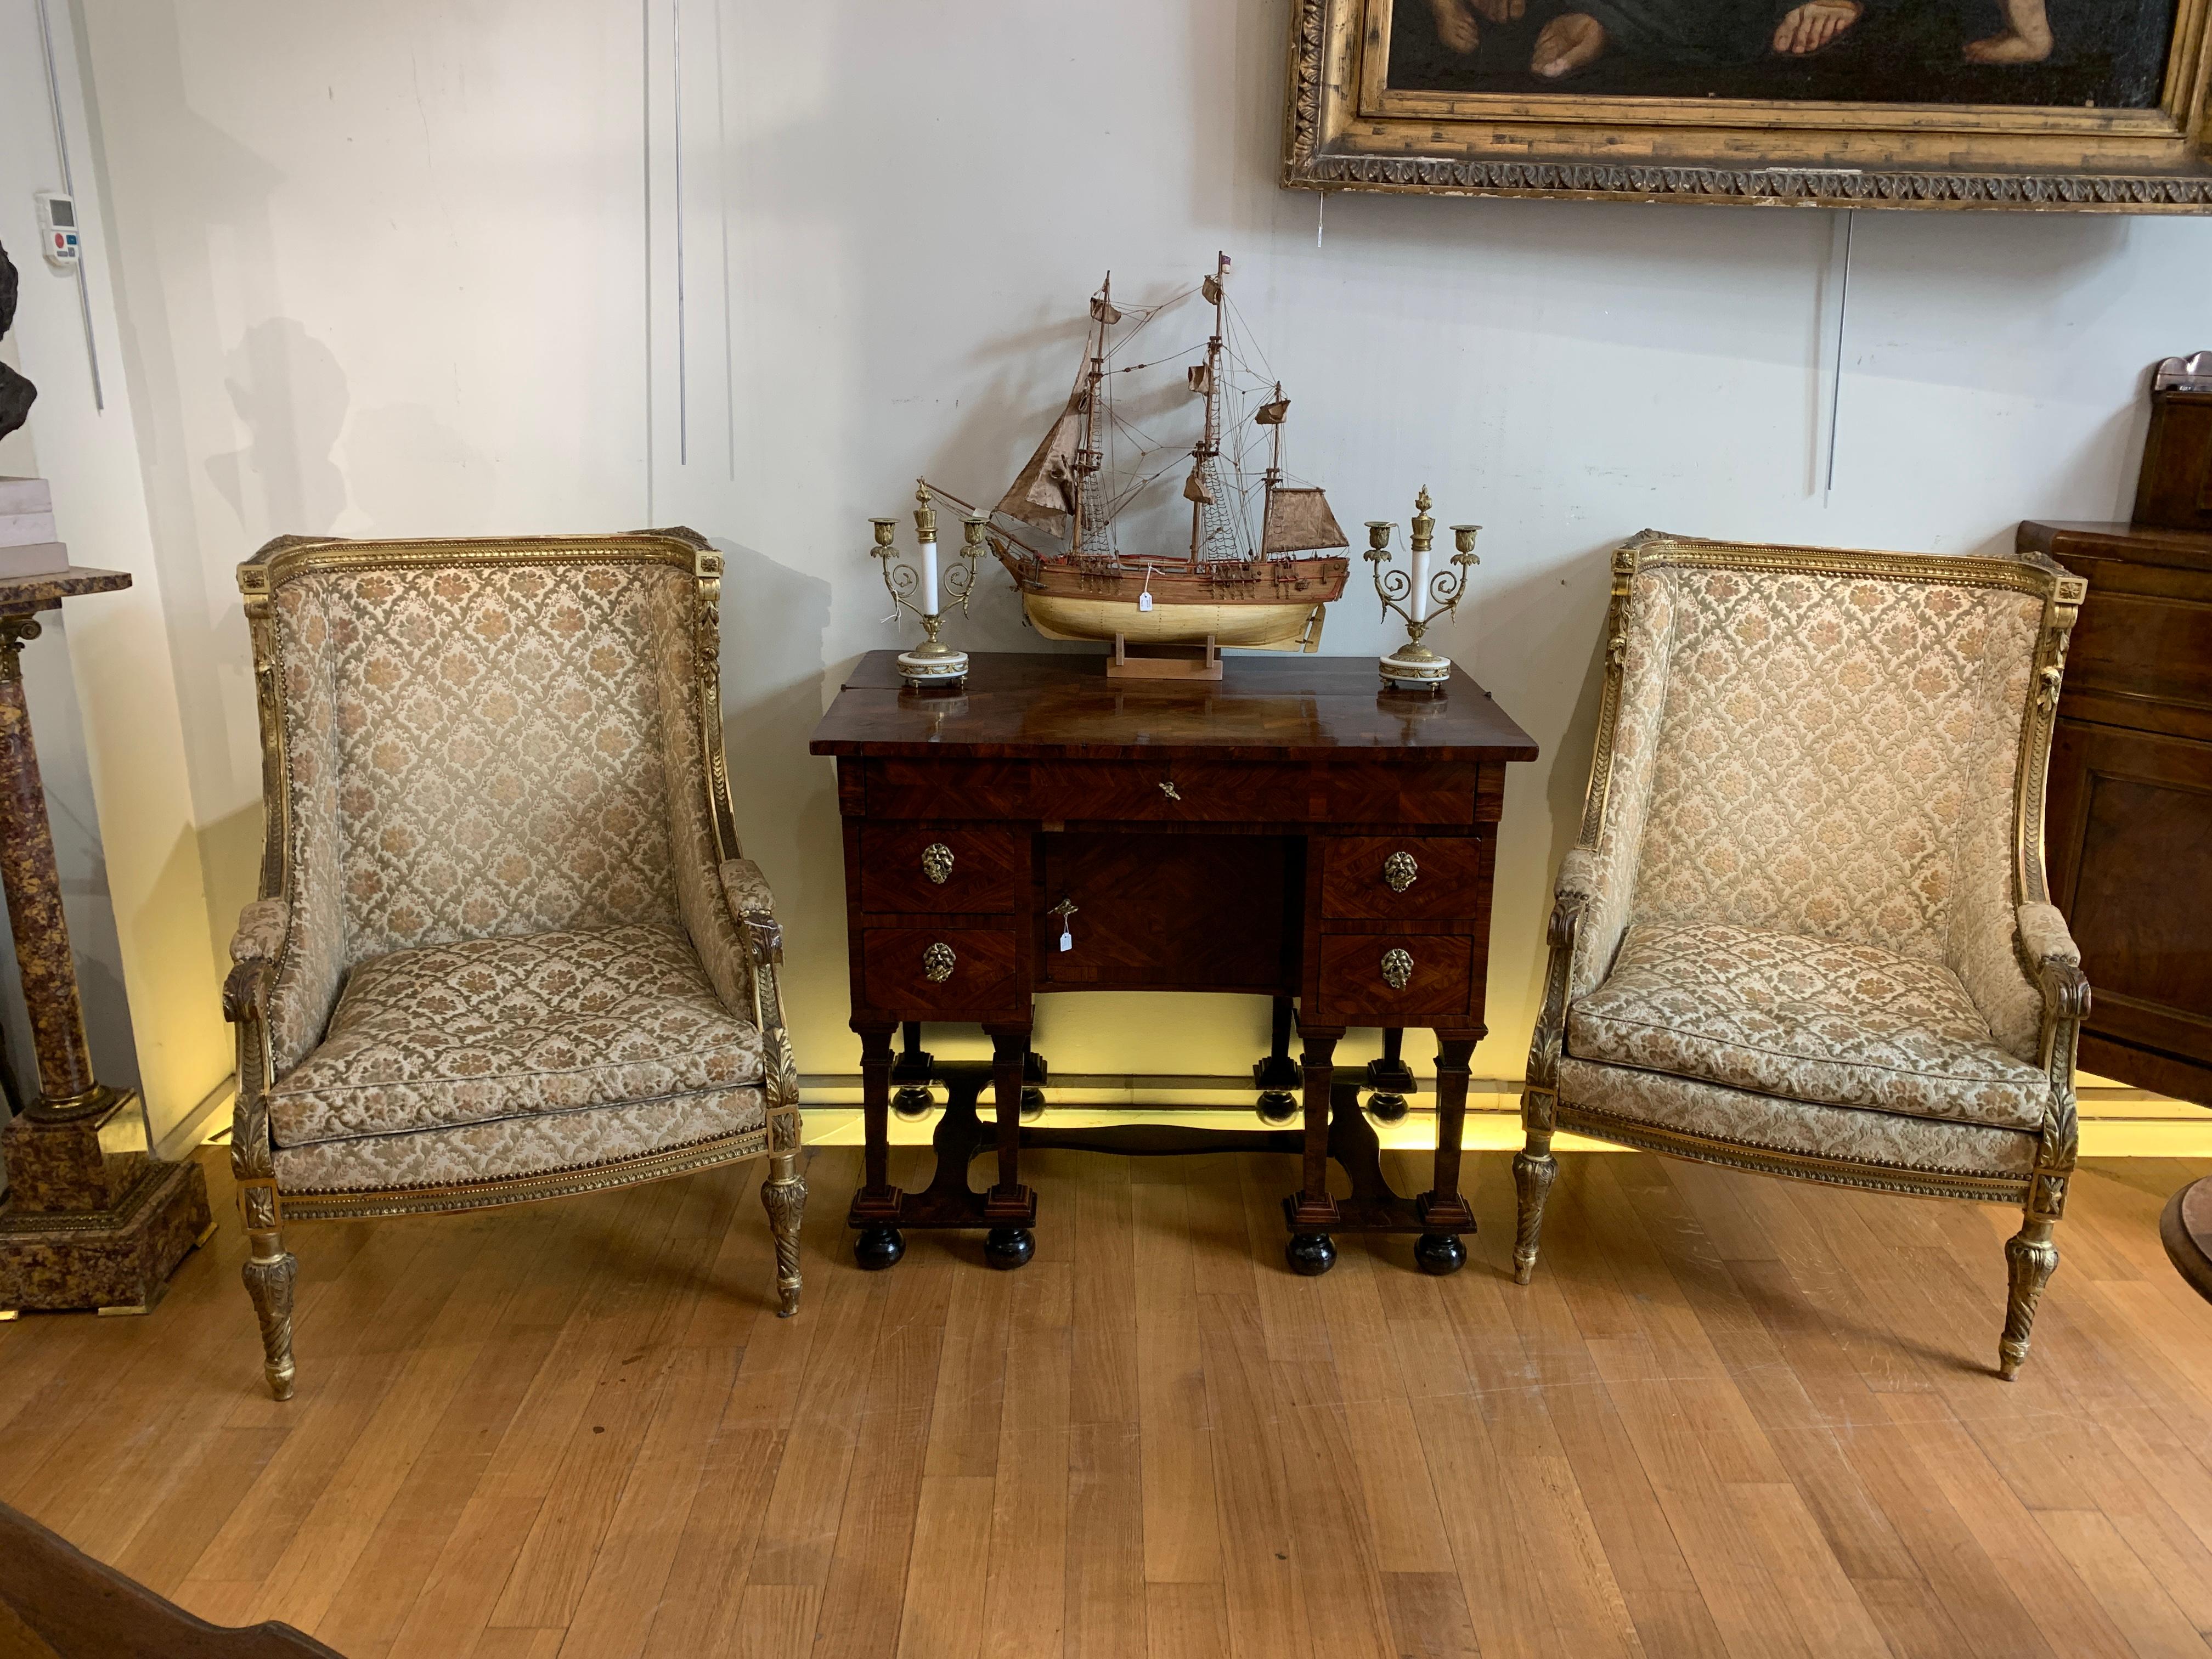 Refined pair of armchairs in the Bergère model, in gilded and carved pine wood. The upholstery is original, recalling phytomorphic motifs and weavings. The padding is also in excellent condition and ensures a comfortable seat for the armchair. The